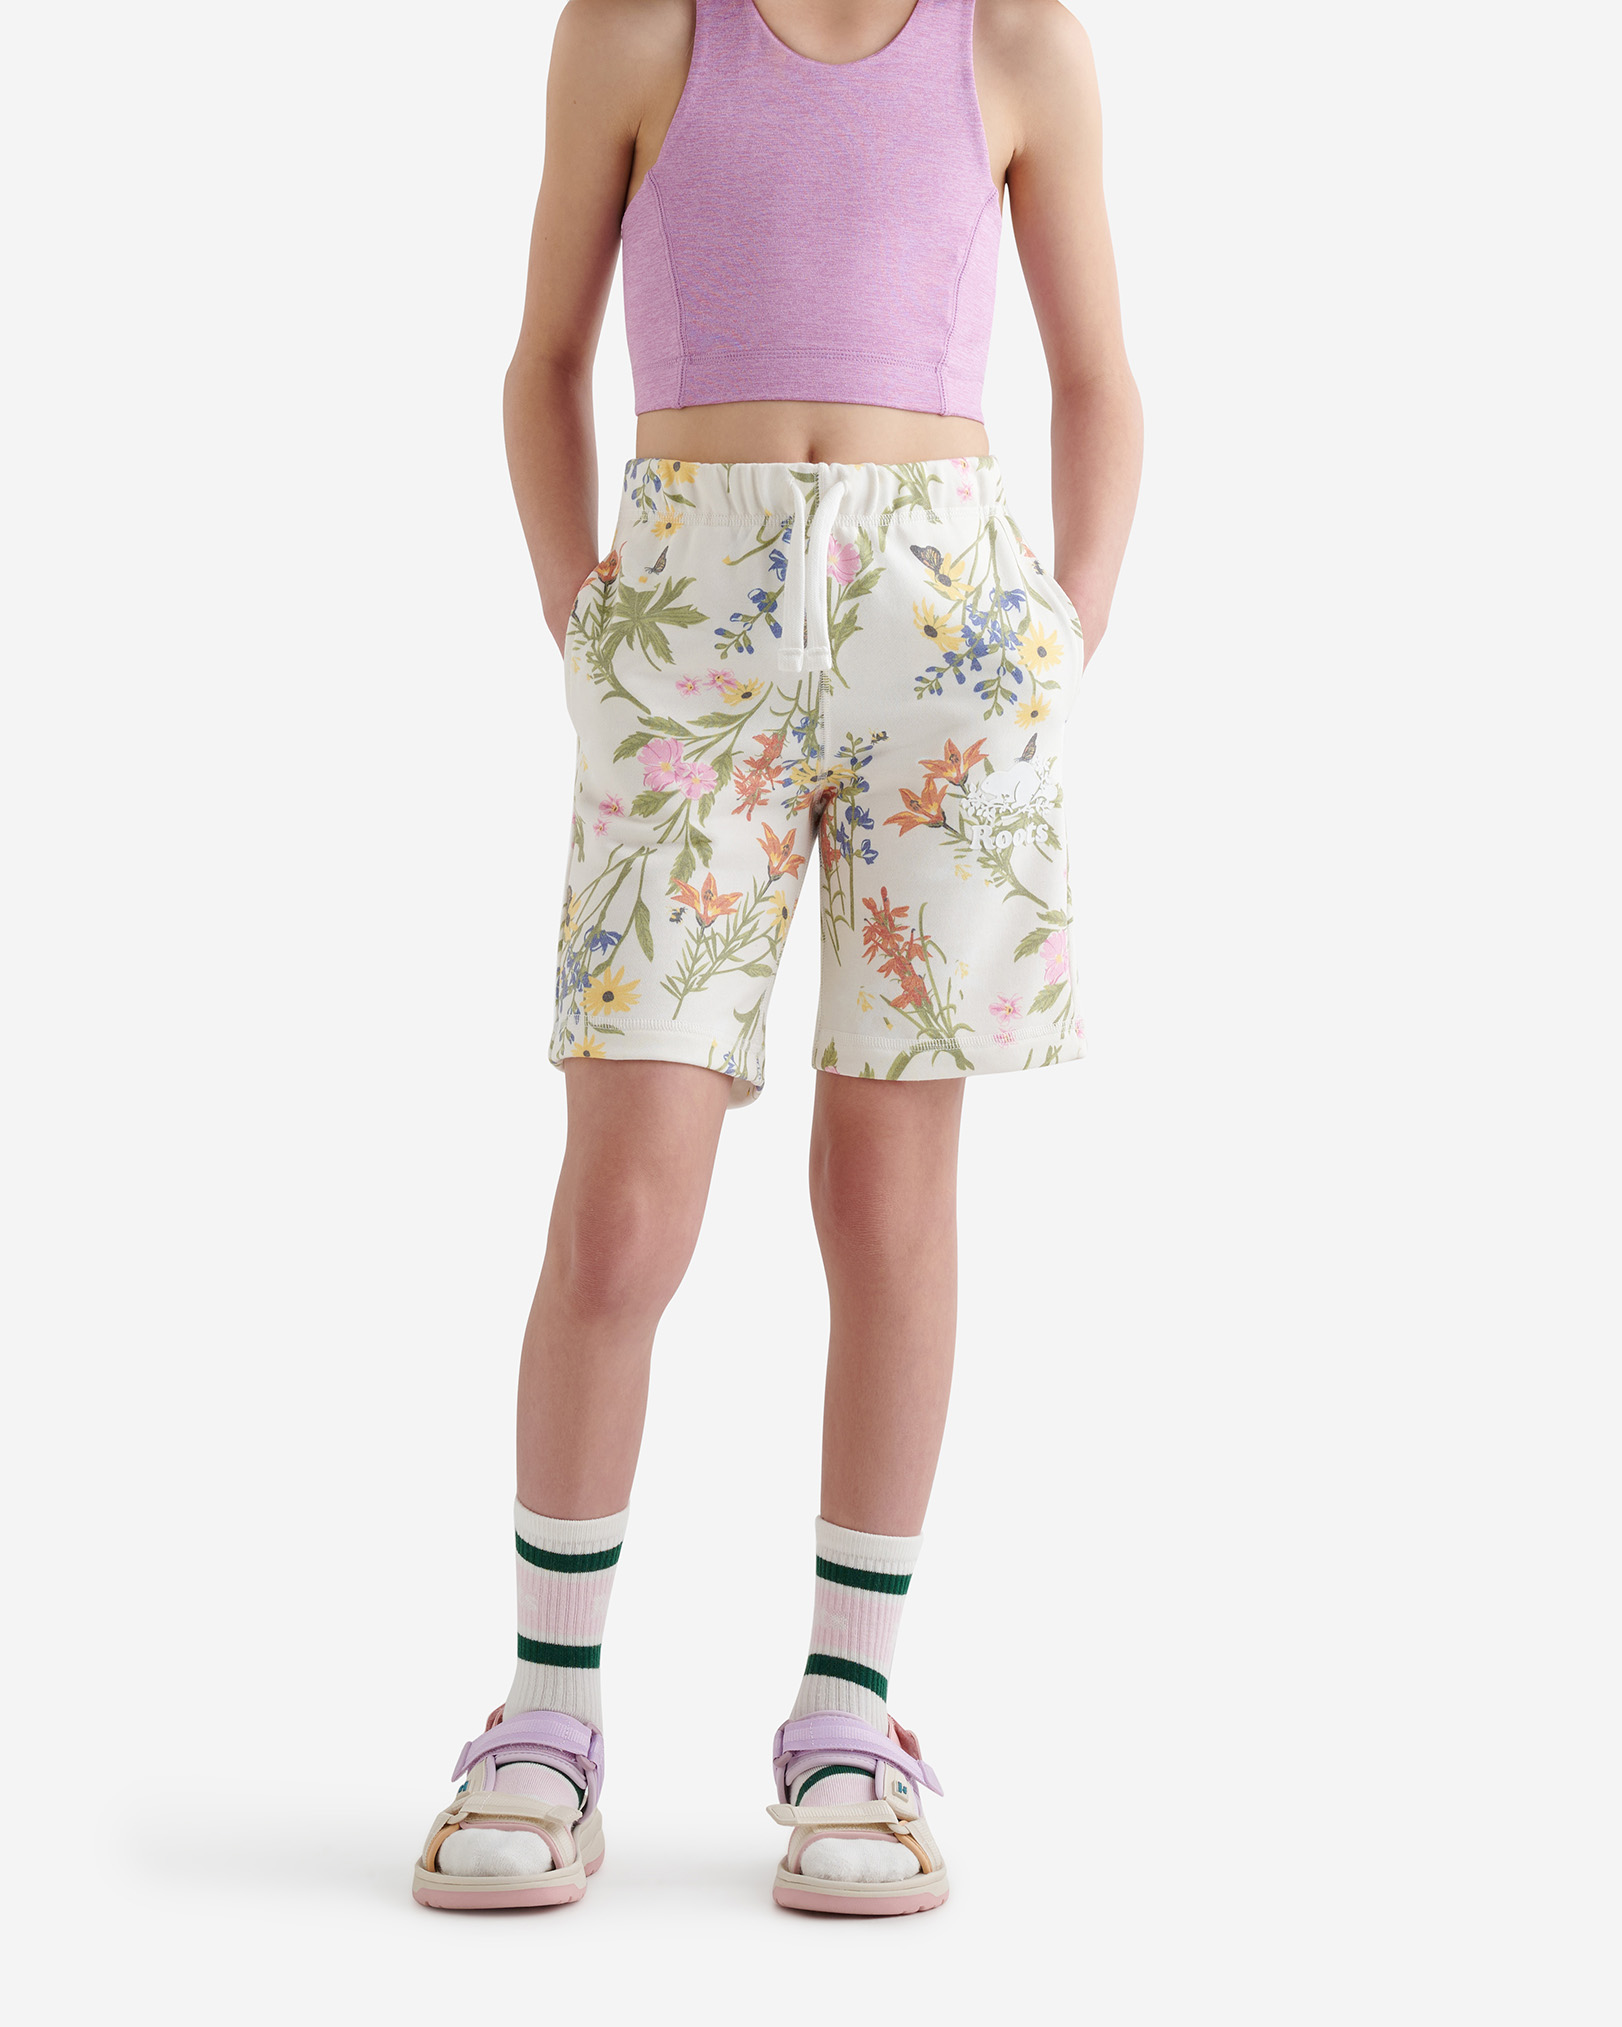 Roots Kids Floral Short in Turtledove Cream